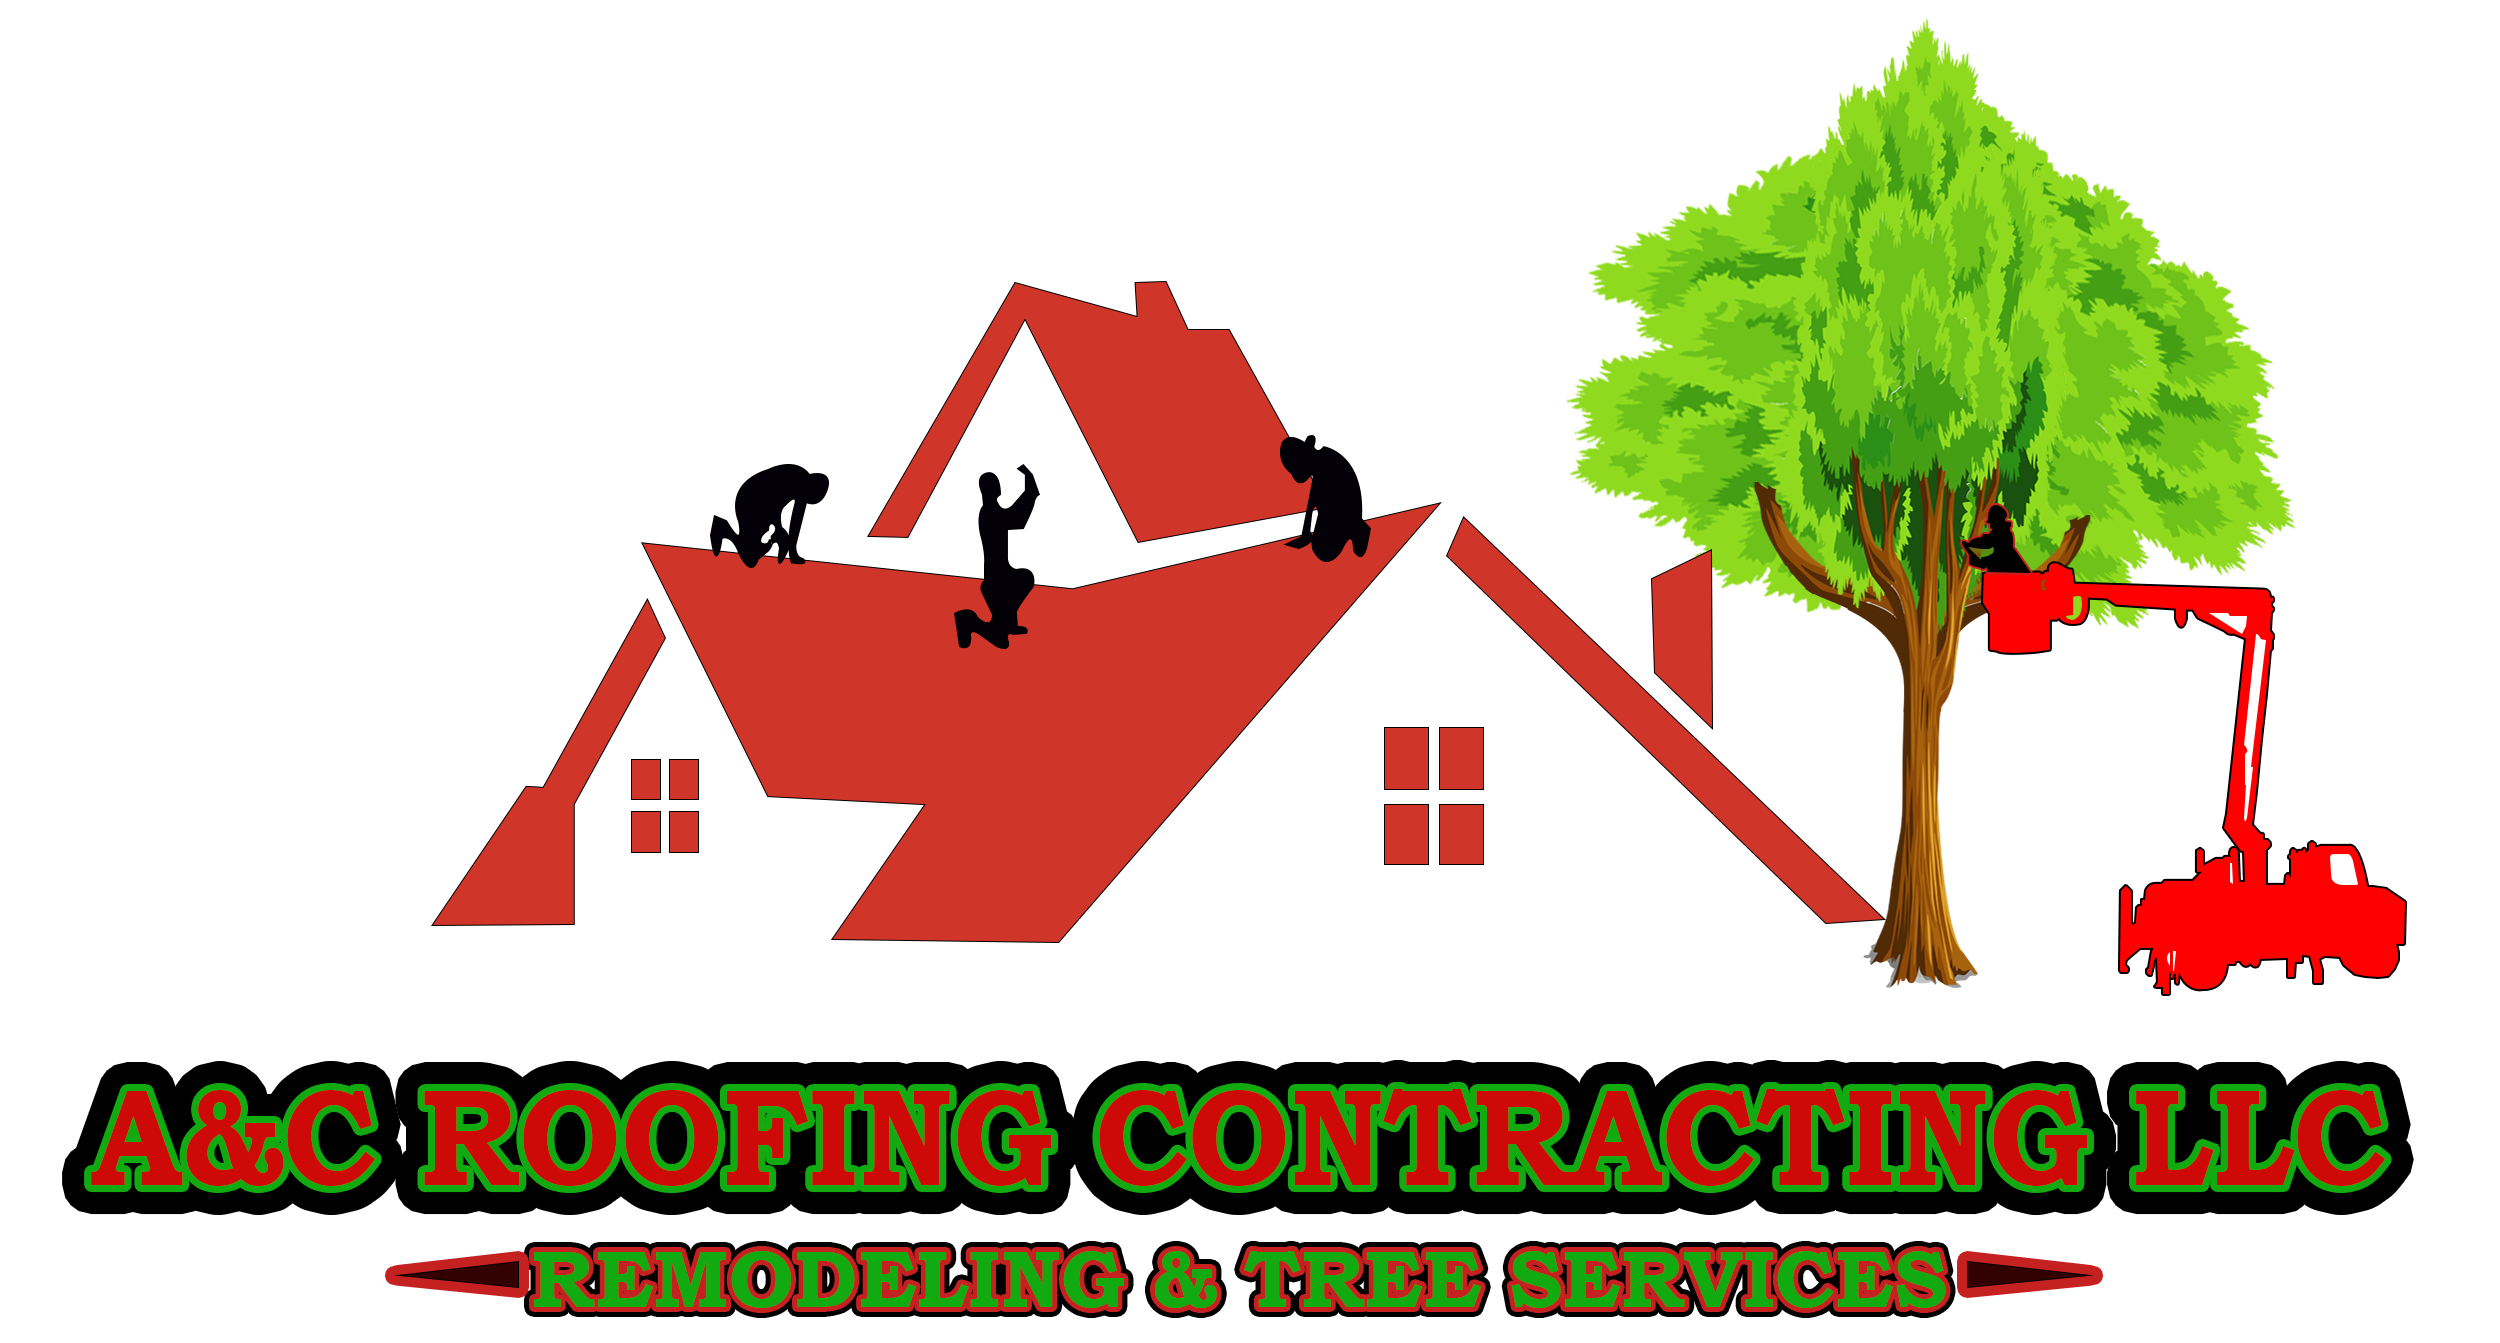 A&C Roofing Contracting LLC
